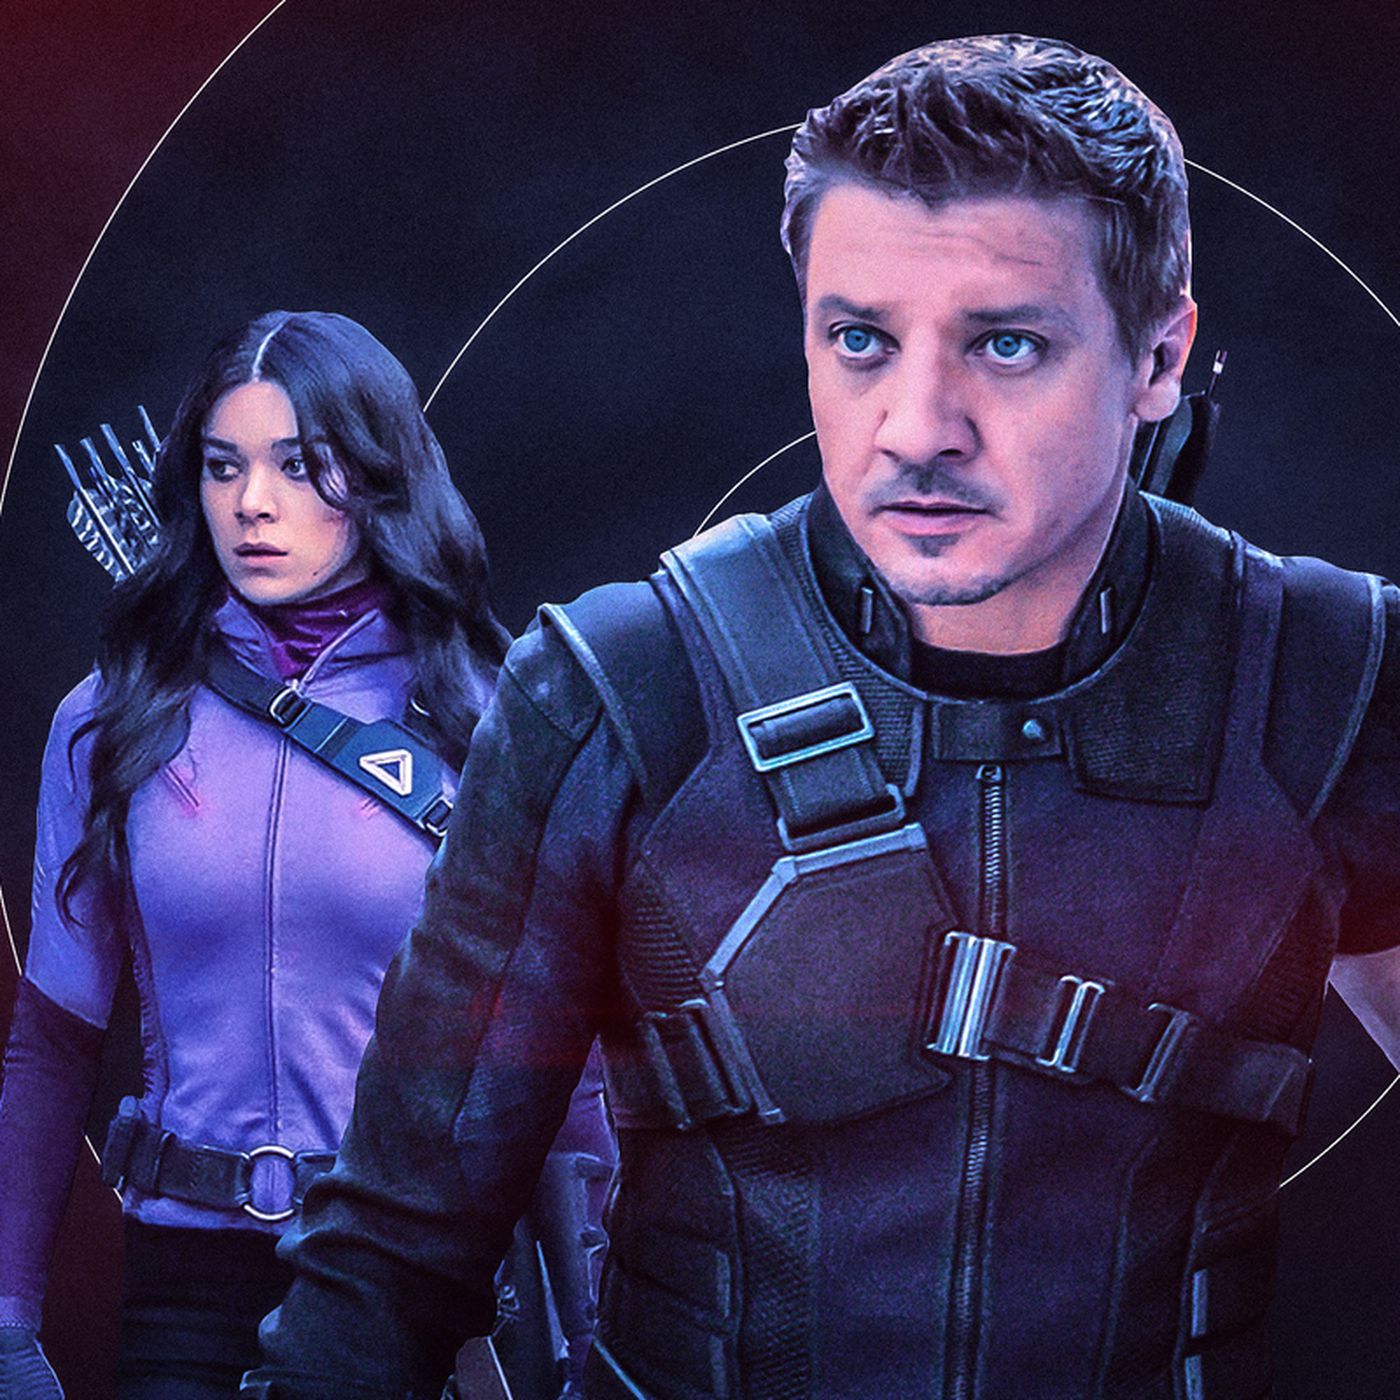 Marvel Hawkeye Finale Ending Explained The Rolex Watch, Kingpin, and